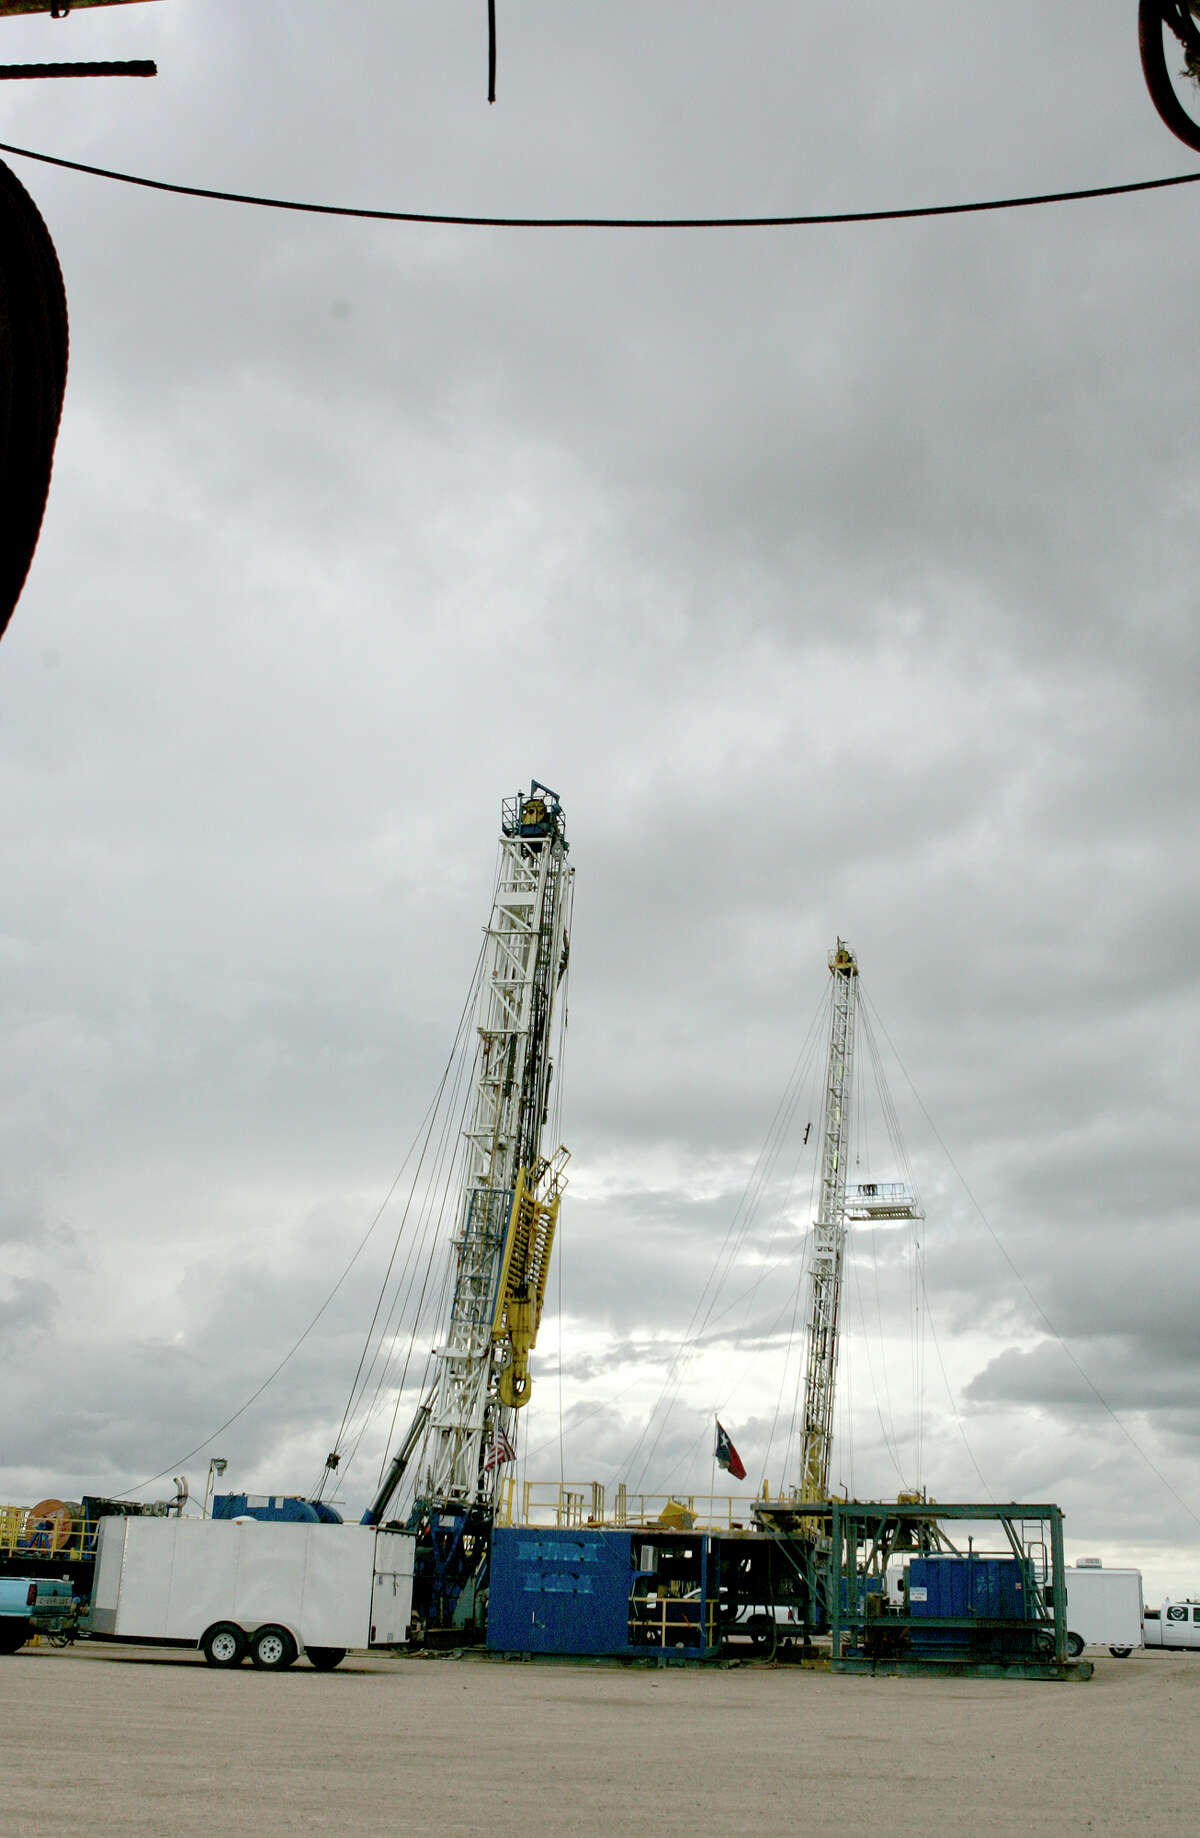 A pair of drilling rigs with will soon be deployed into the field sit in the Desta Drilling yard.